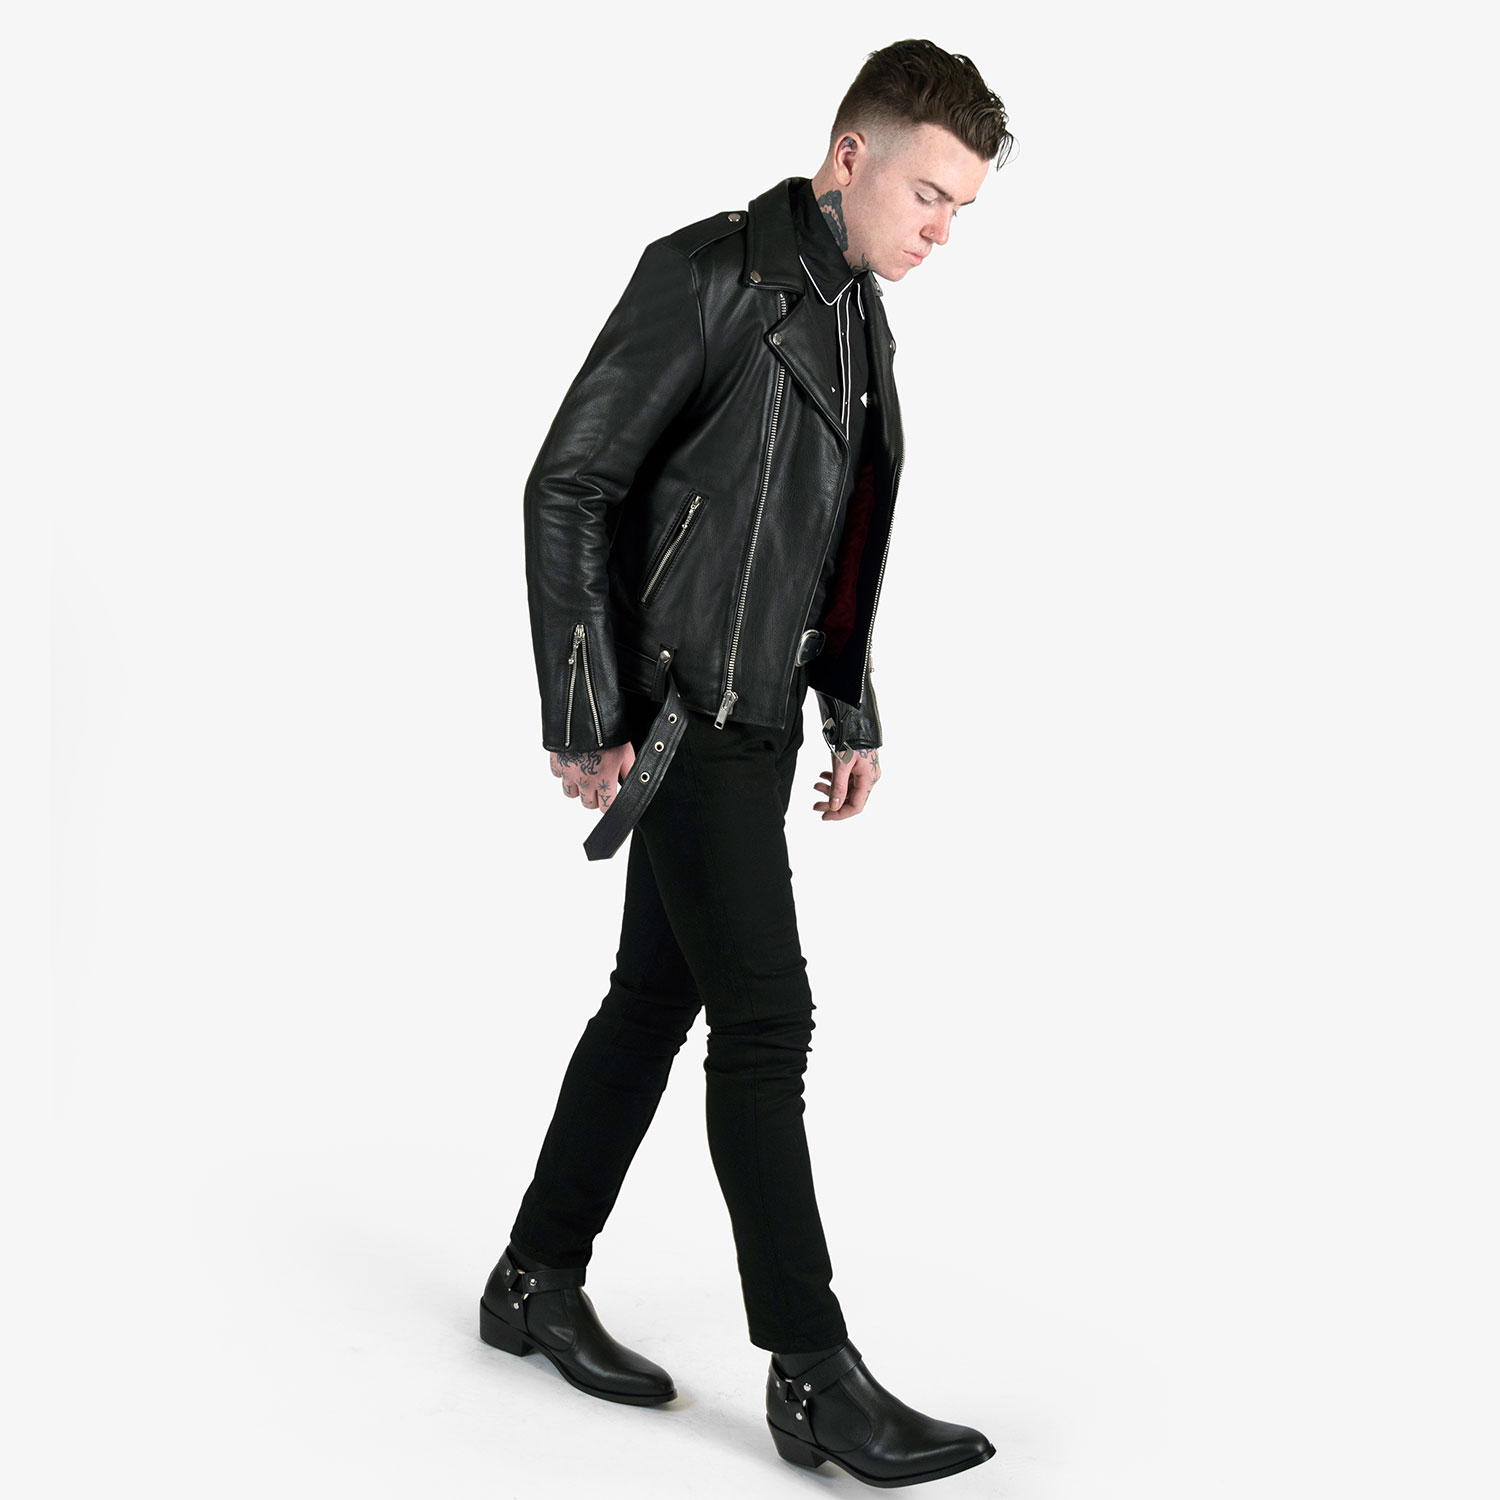 Commando - Black and Nickel Leather Jacket | Straight To Hell Apparel